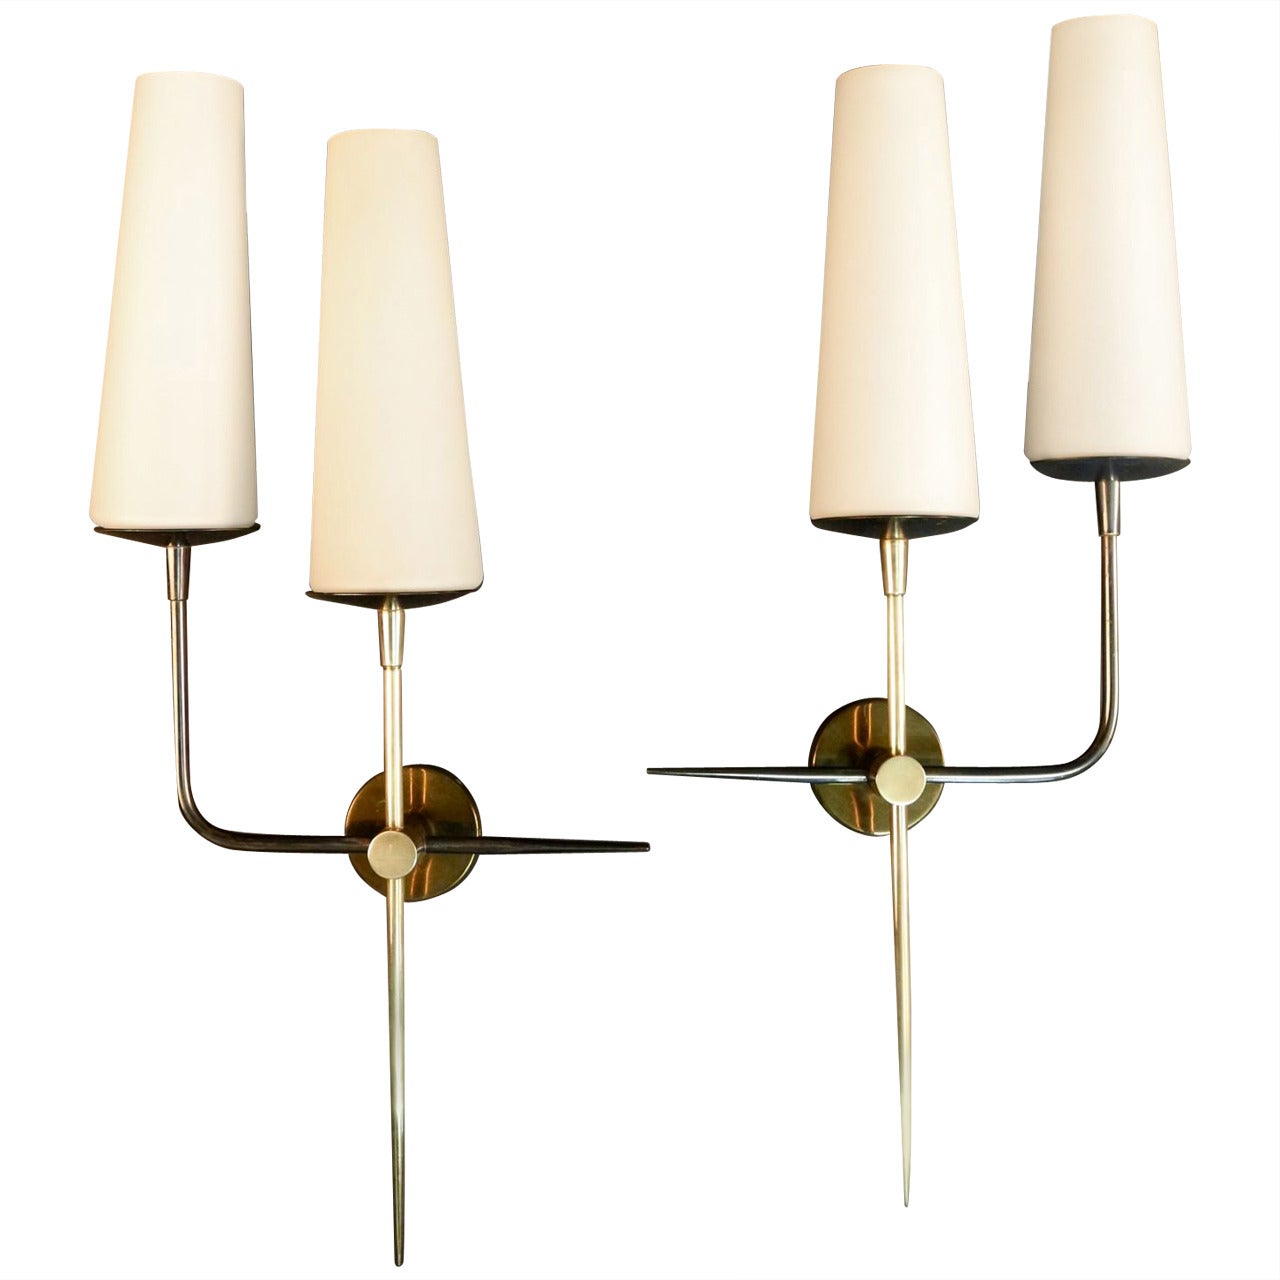 Pair of 1950s Asymmetrical Sconces by Maison Arlus